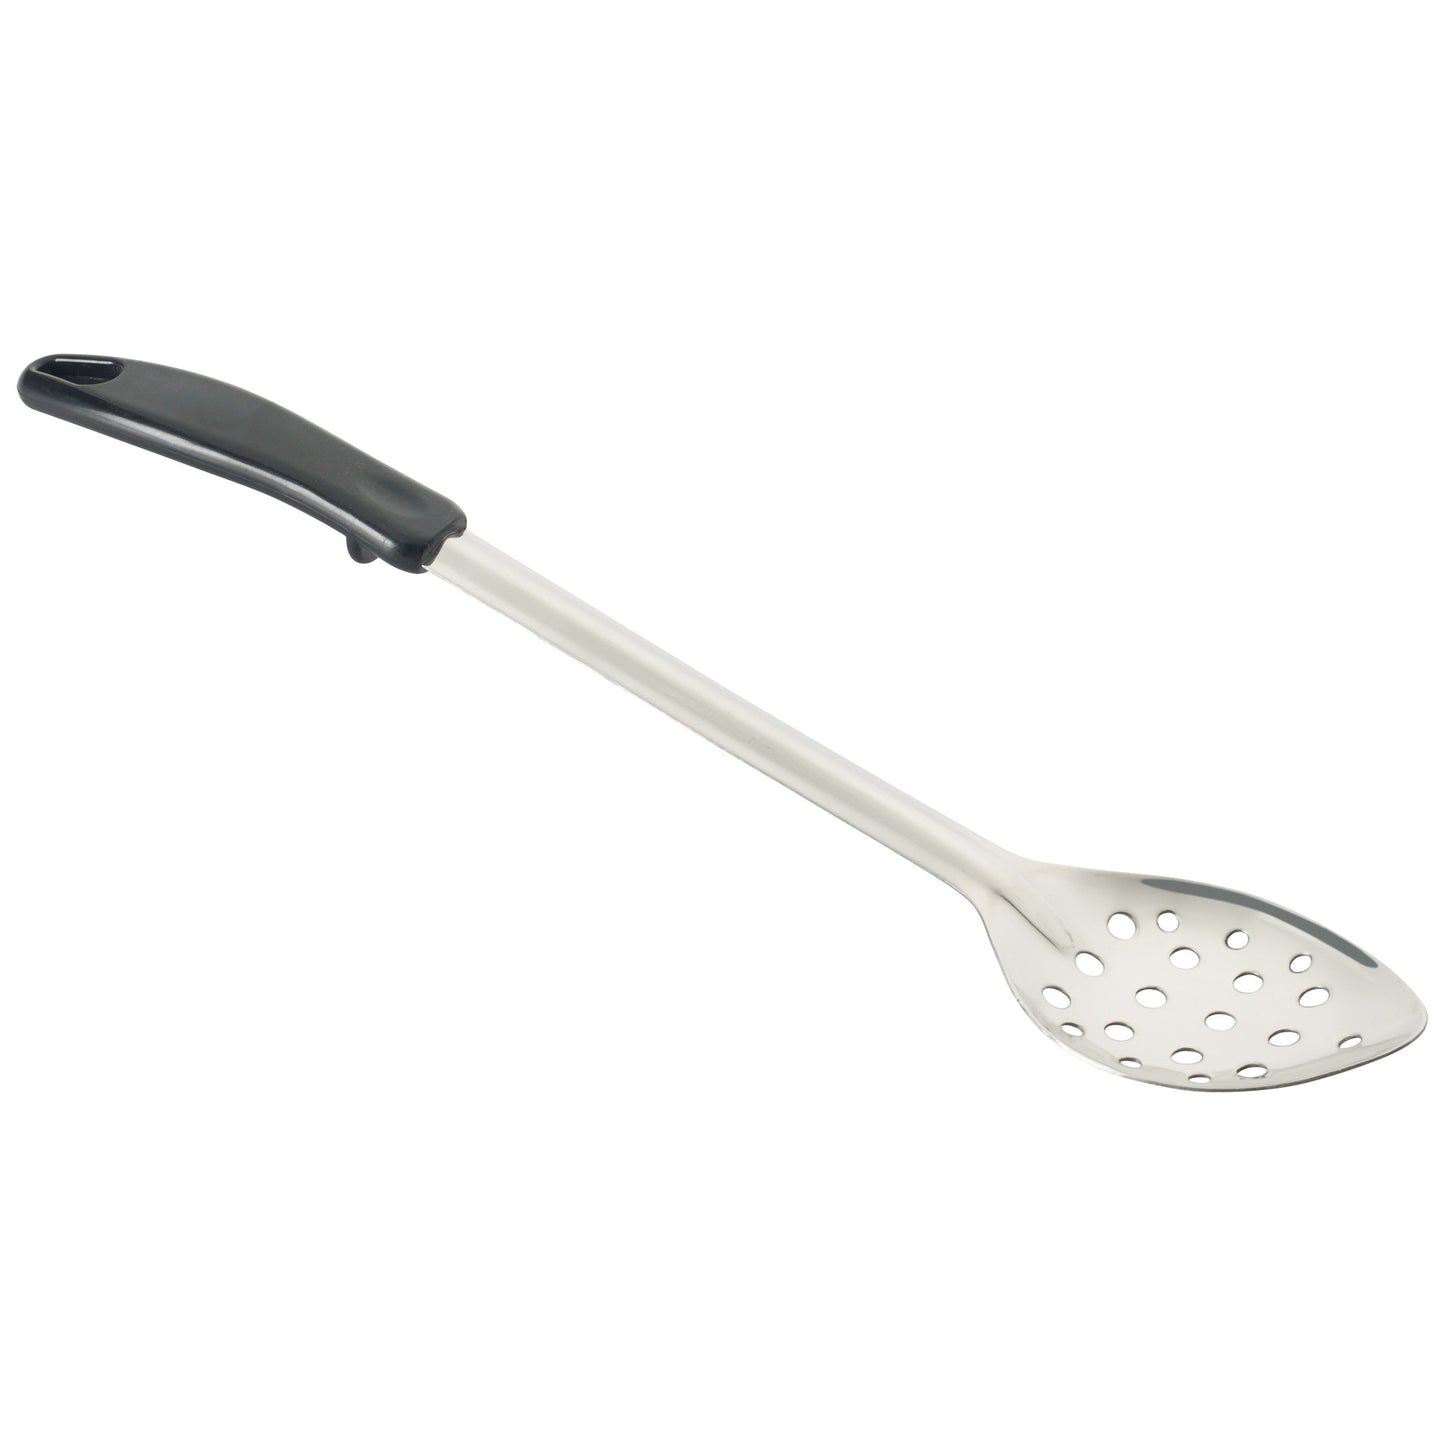 BHPP-15 - Basting Spoon with Stop-Hook Polypropylene Handle - Perforated, 15"